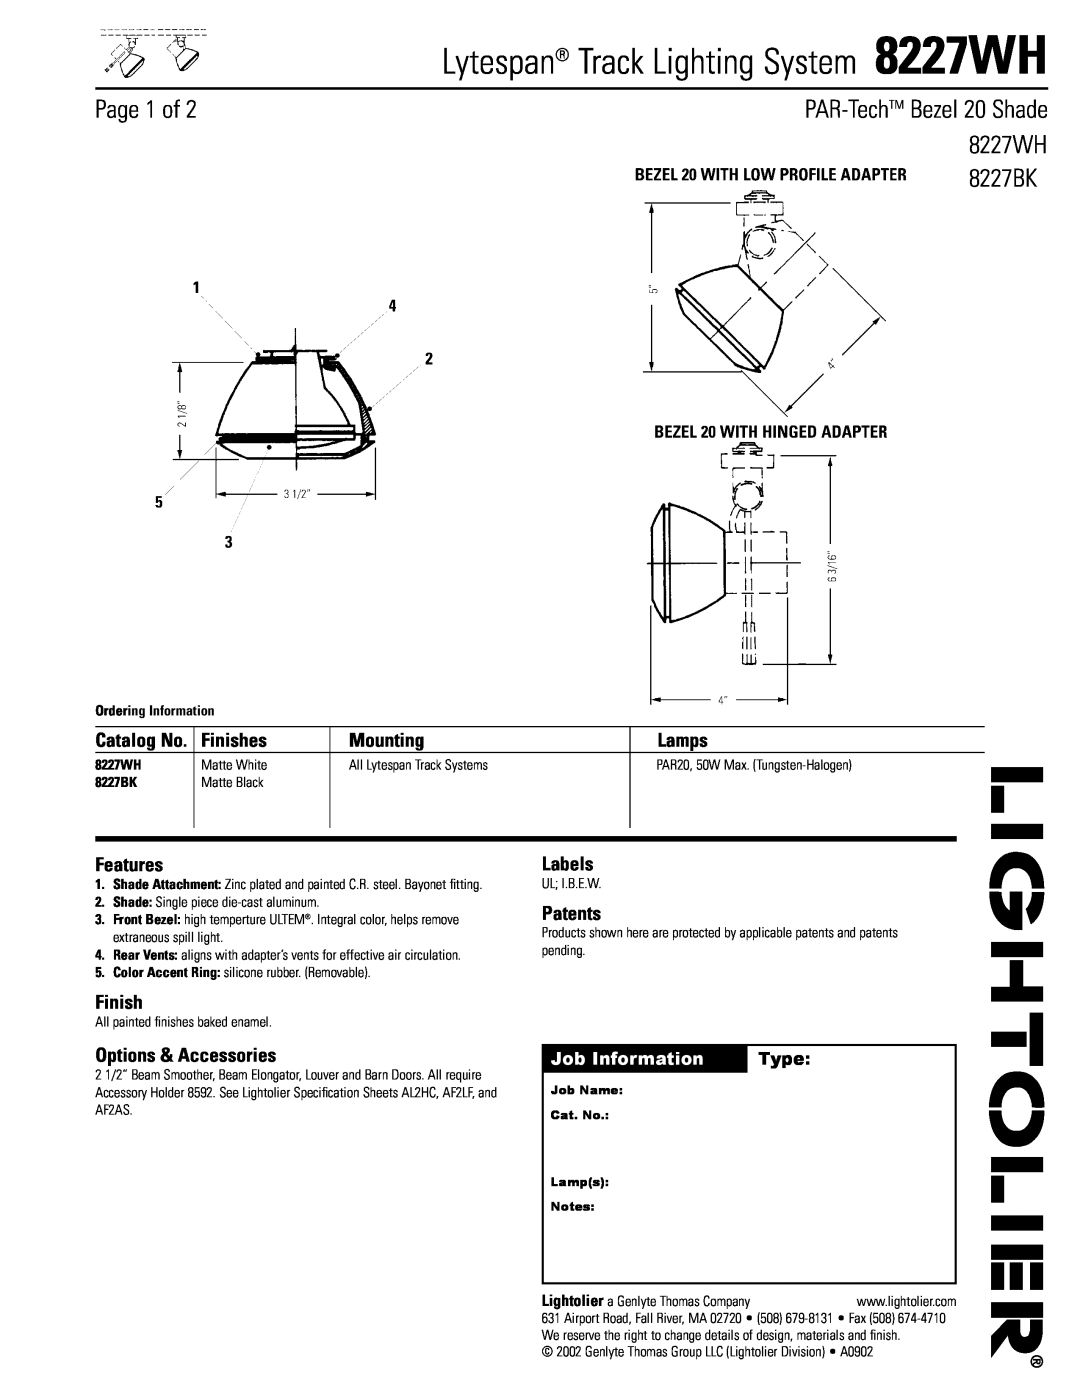 Lightolier 8227WH specifications Page 1 of, PAR-TechTM Bezel 20 Shade, Finishes, Mounting, Lamps, Features, Labels, Type 